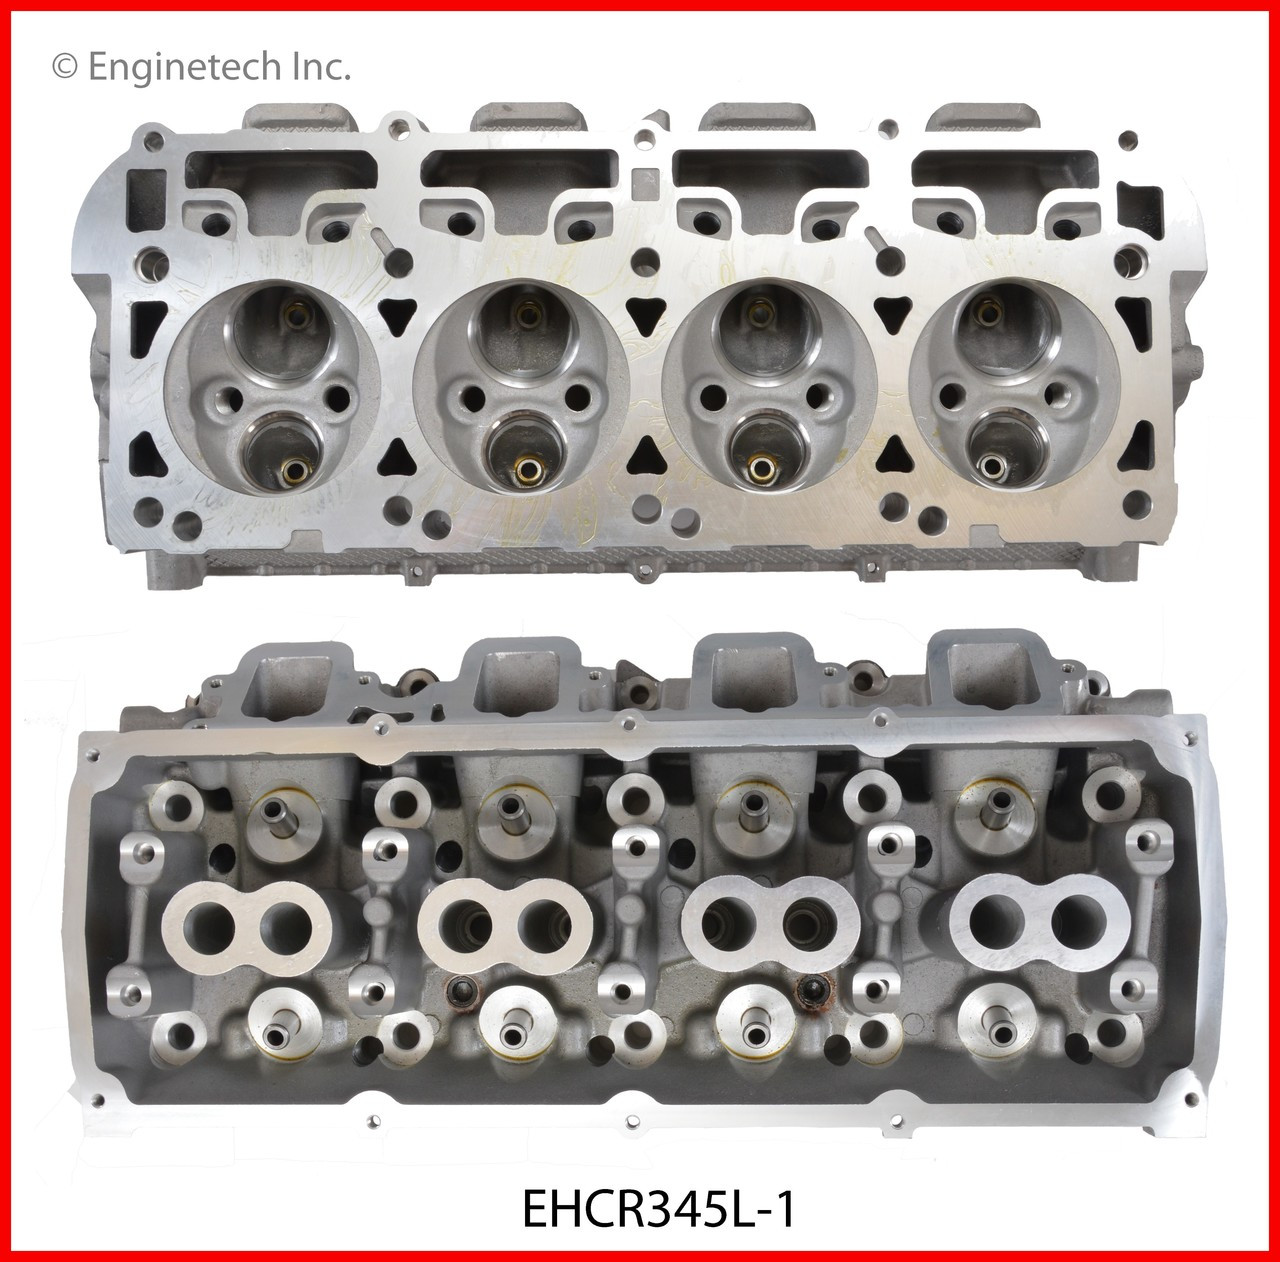 Cylinder Head - 2006 Dodge Charger 5.7L (EHCR345L-1.B16)